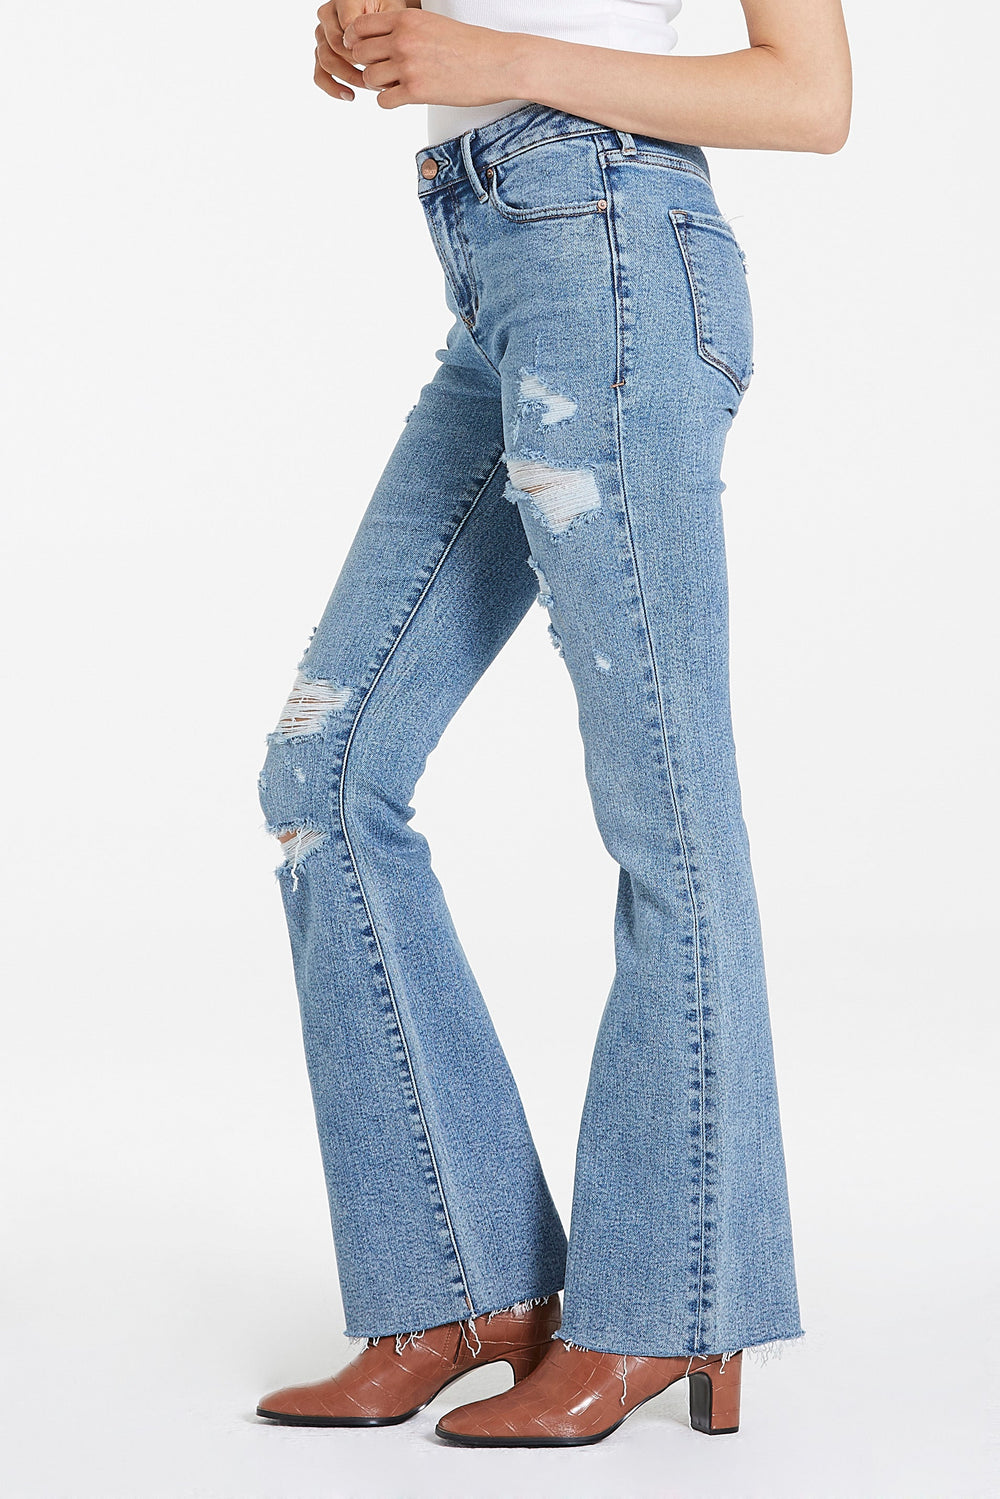 image of a female model wearing a JAXTYN HIGH RISE BOOTCUT JEANS GLASS BEACH JEANS